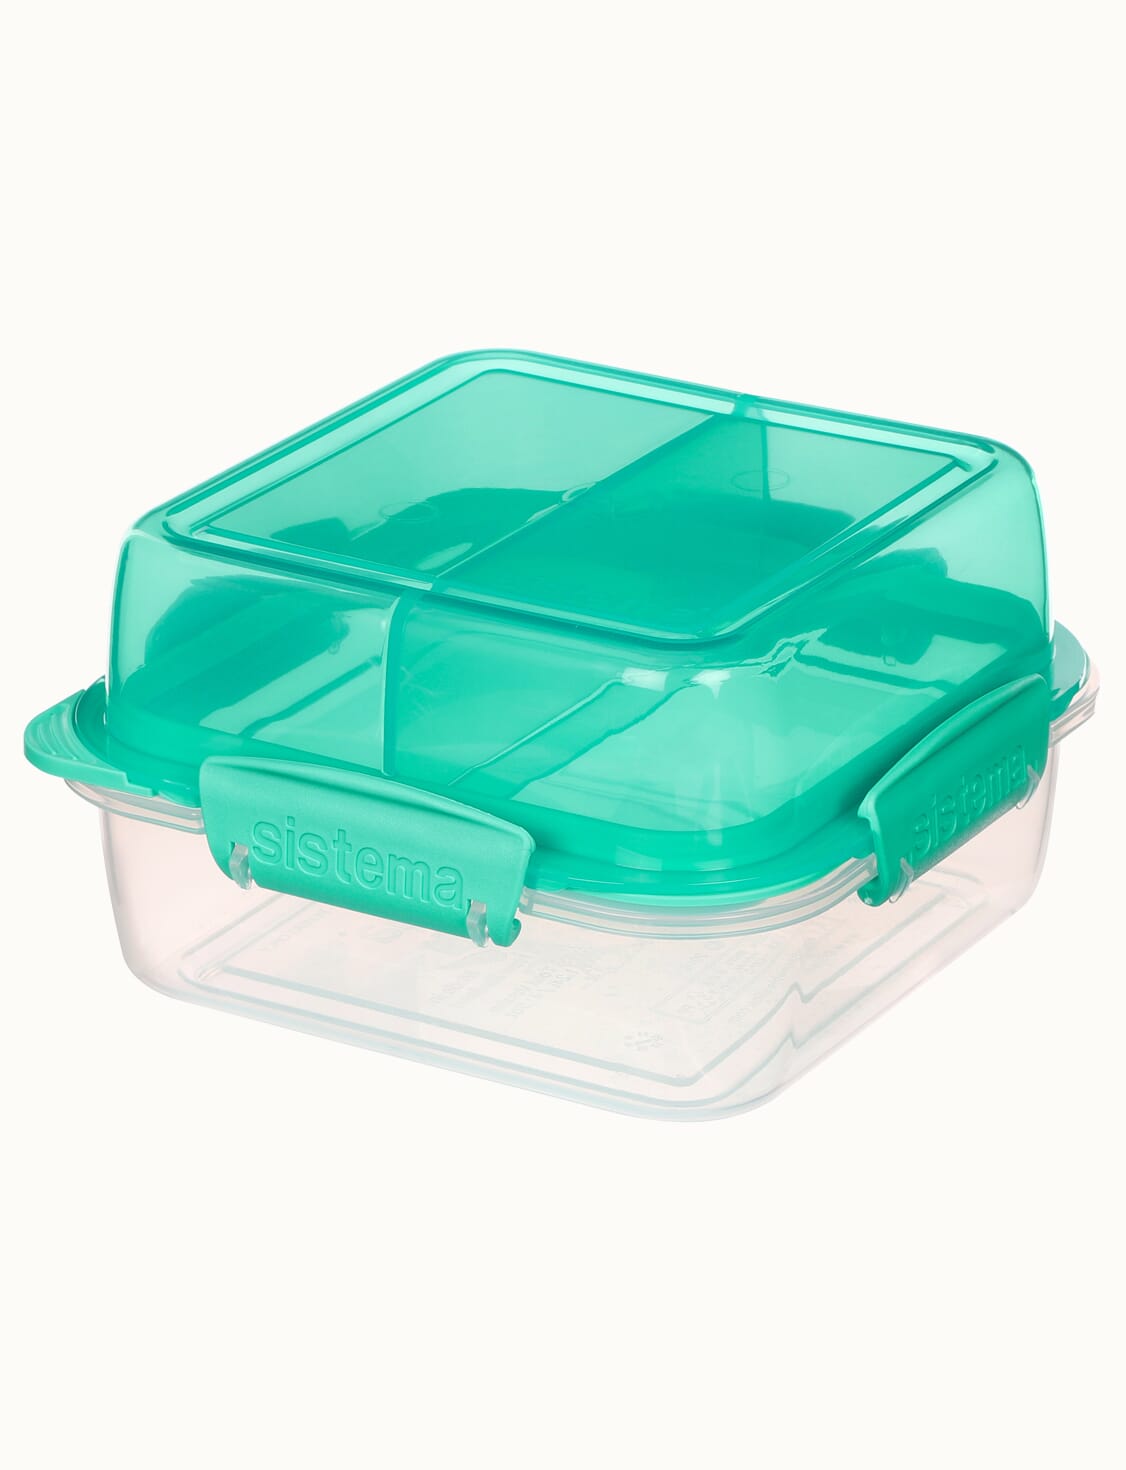 Sistema to go Stackable Round Lunch Box, 32.6 oz - Pay Less Super Markets